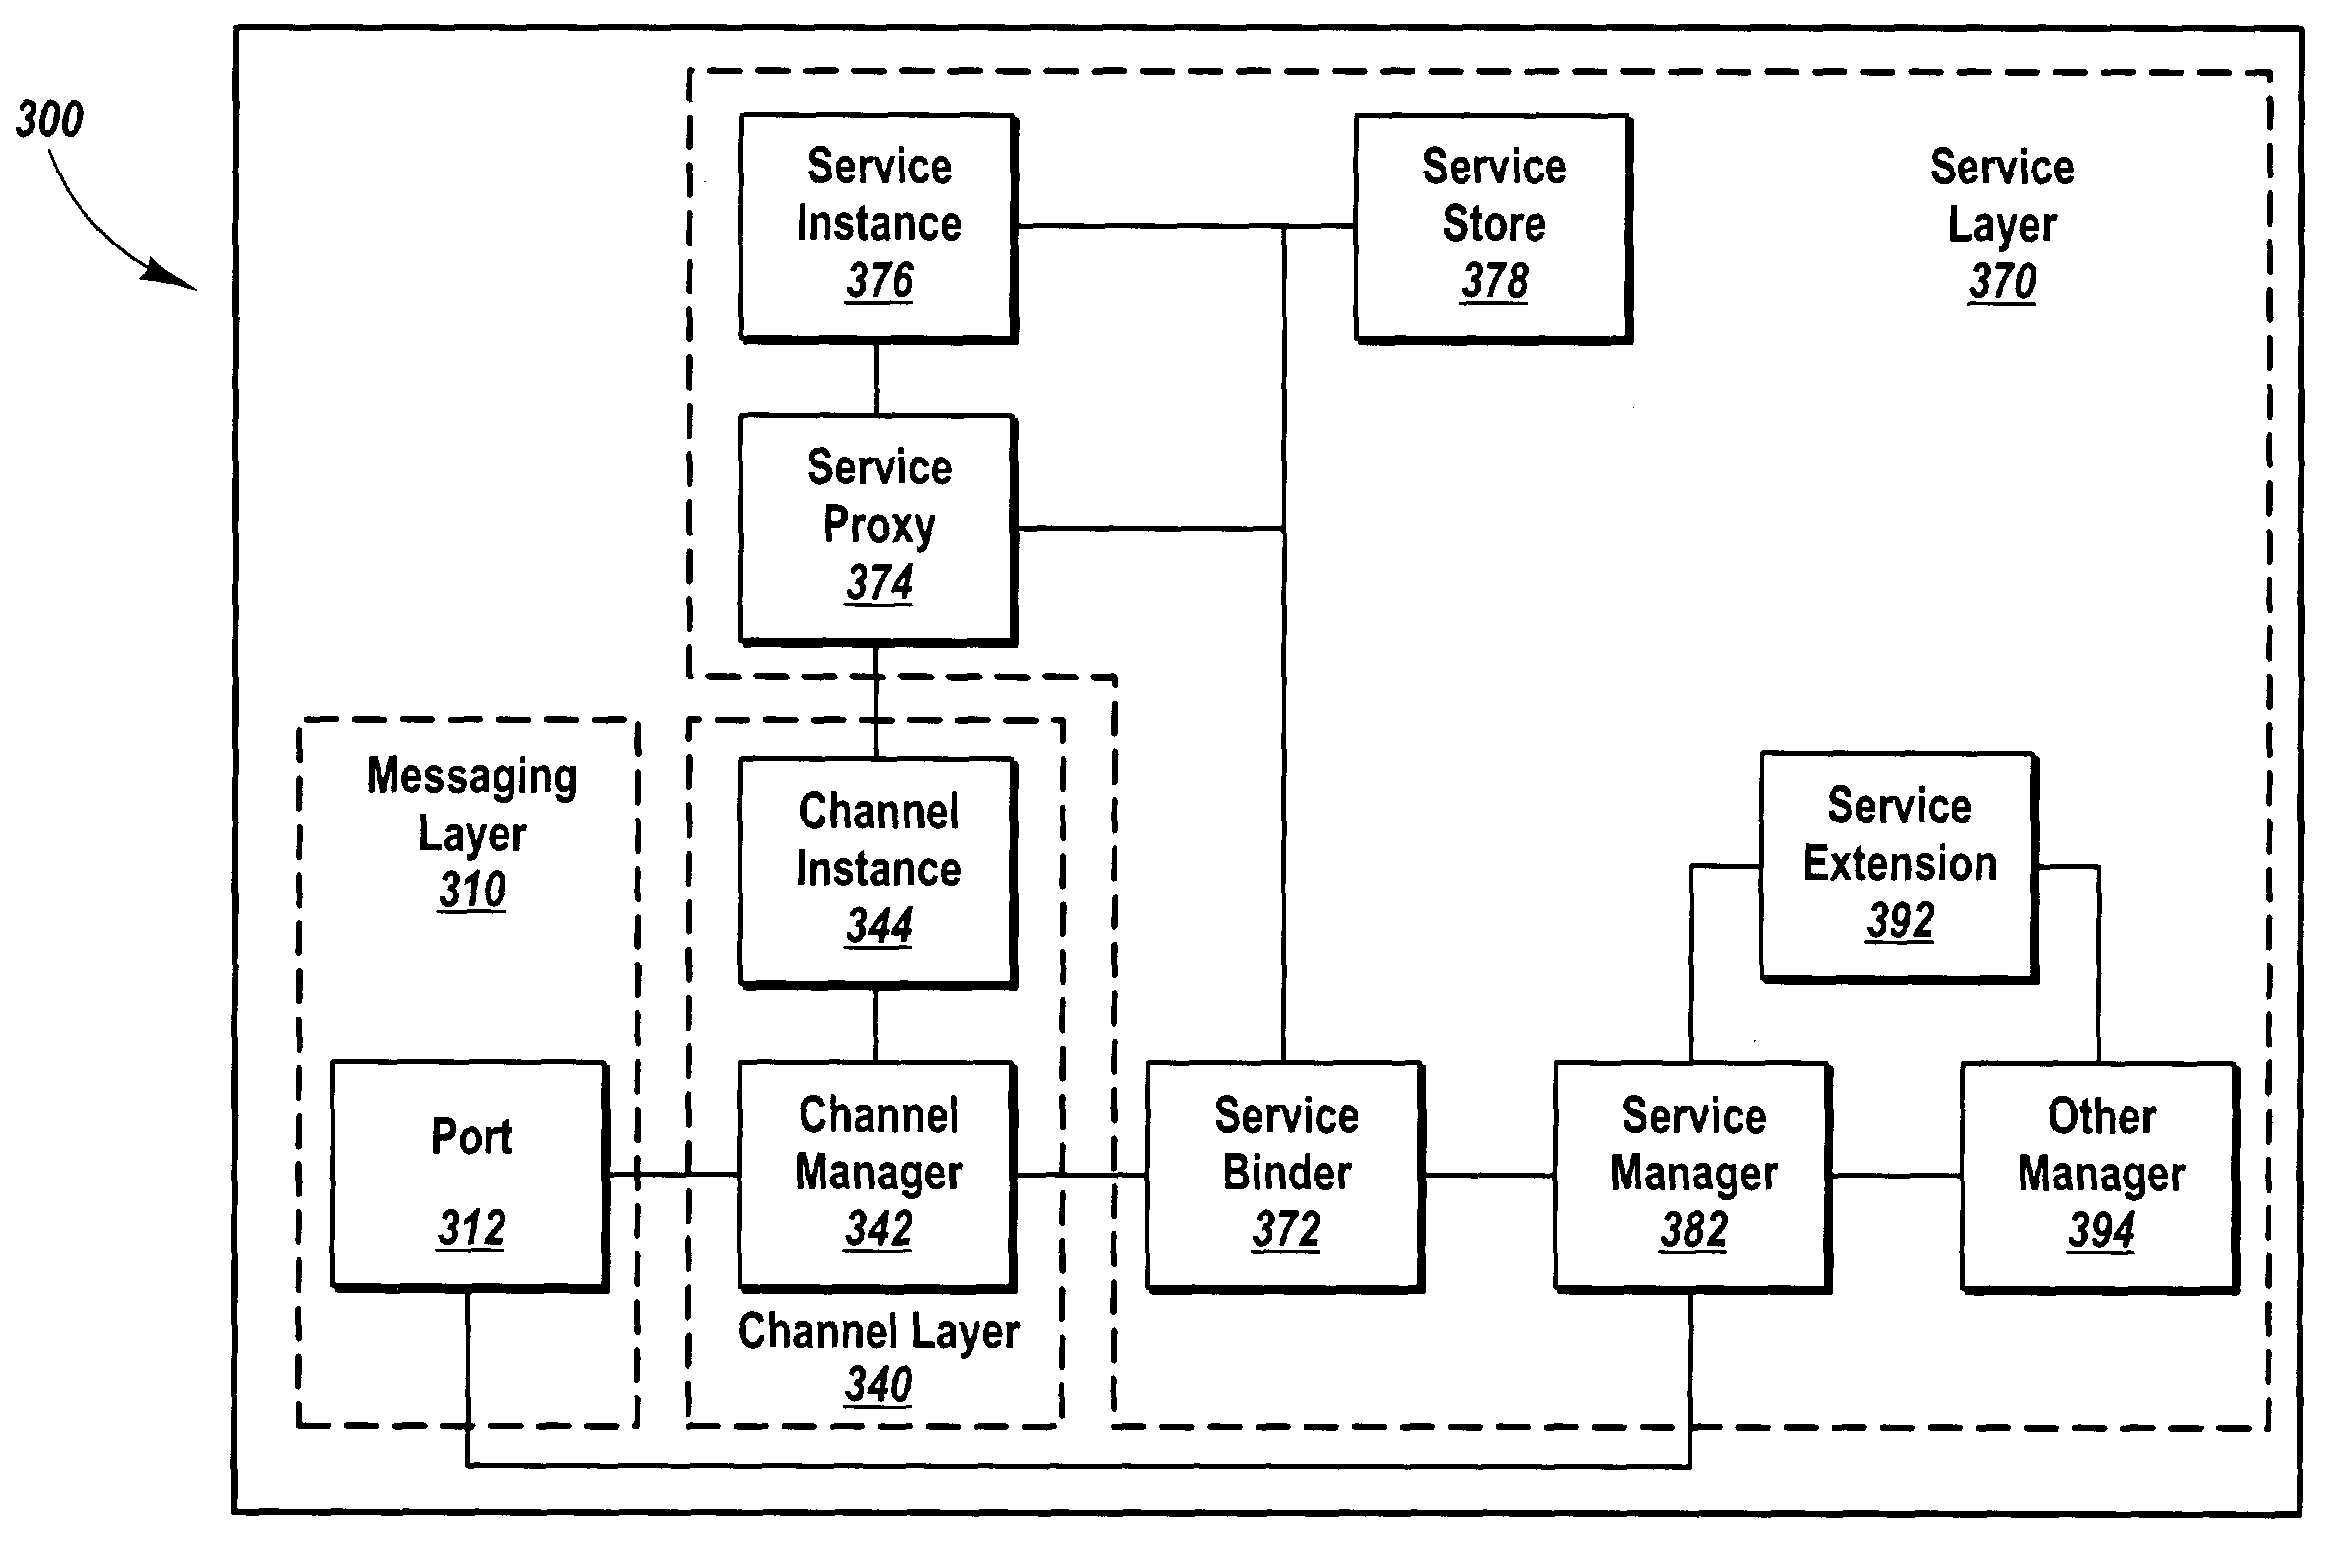 Transmitting and receiving messages through a customizable communication channel and programming model